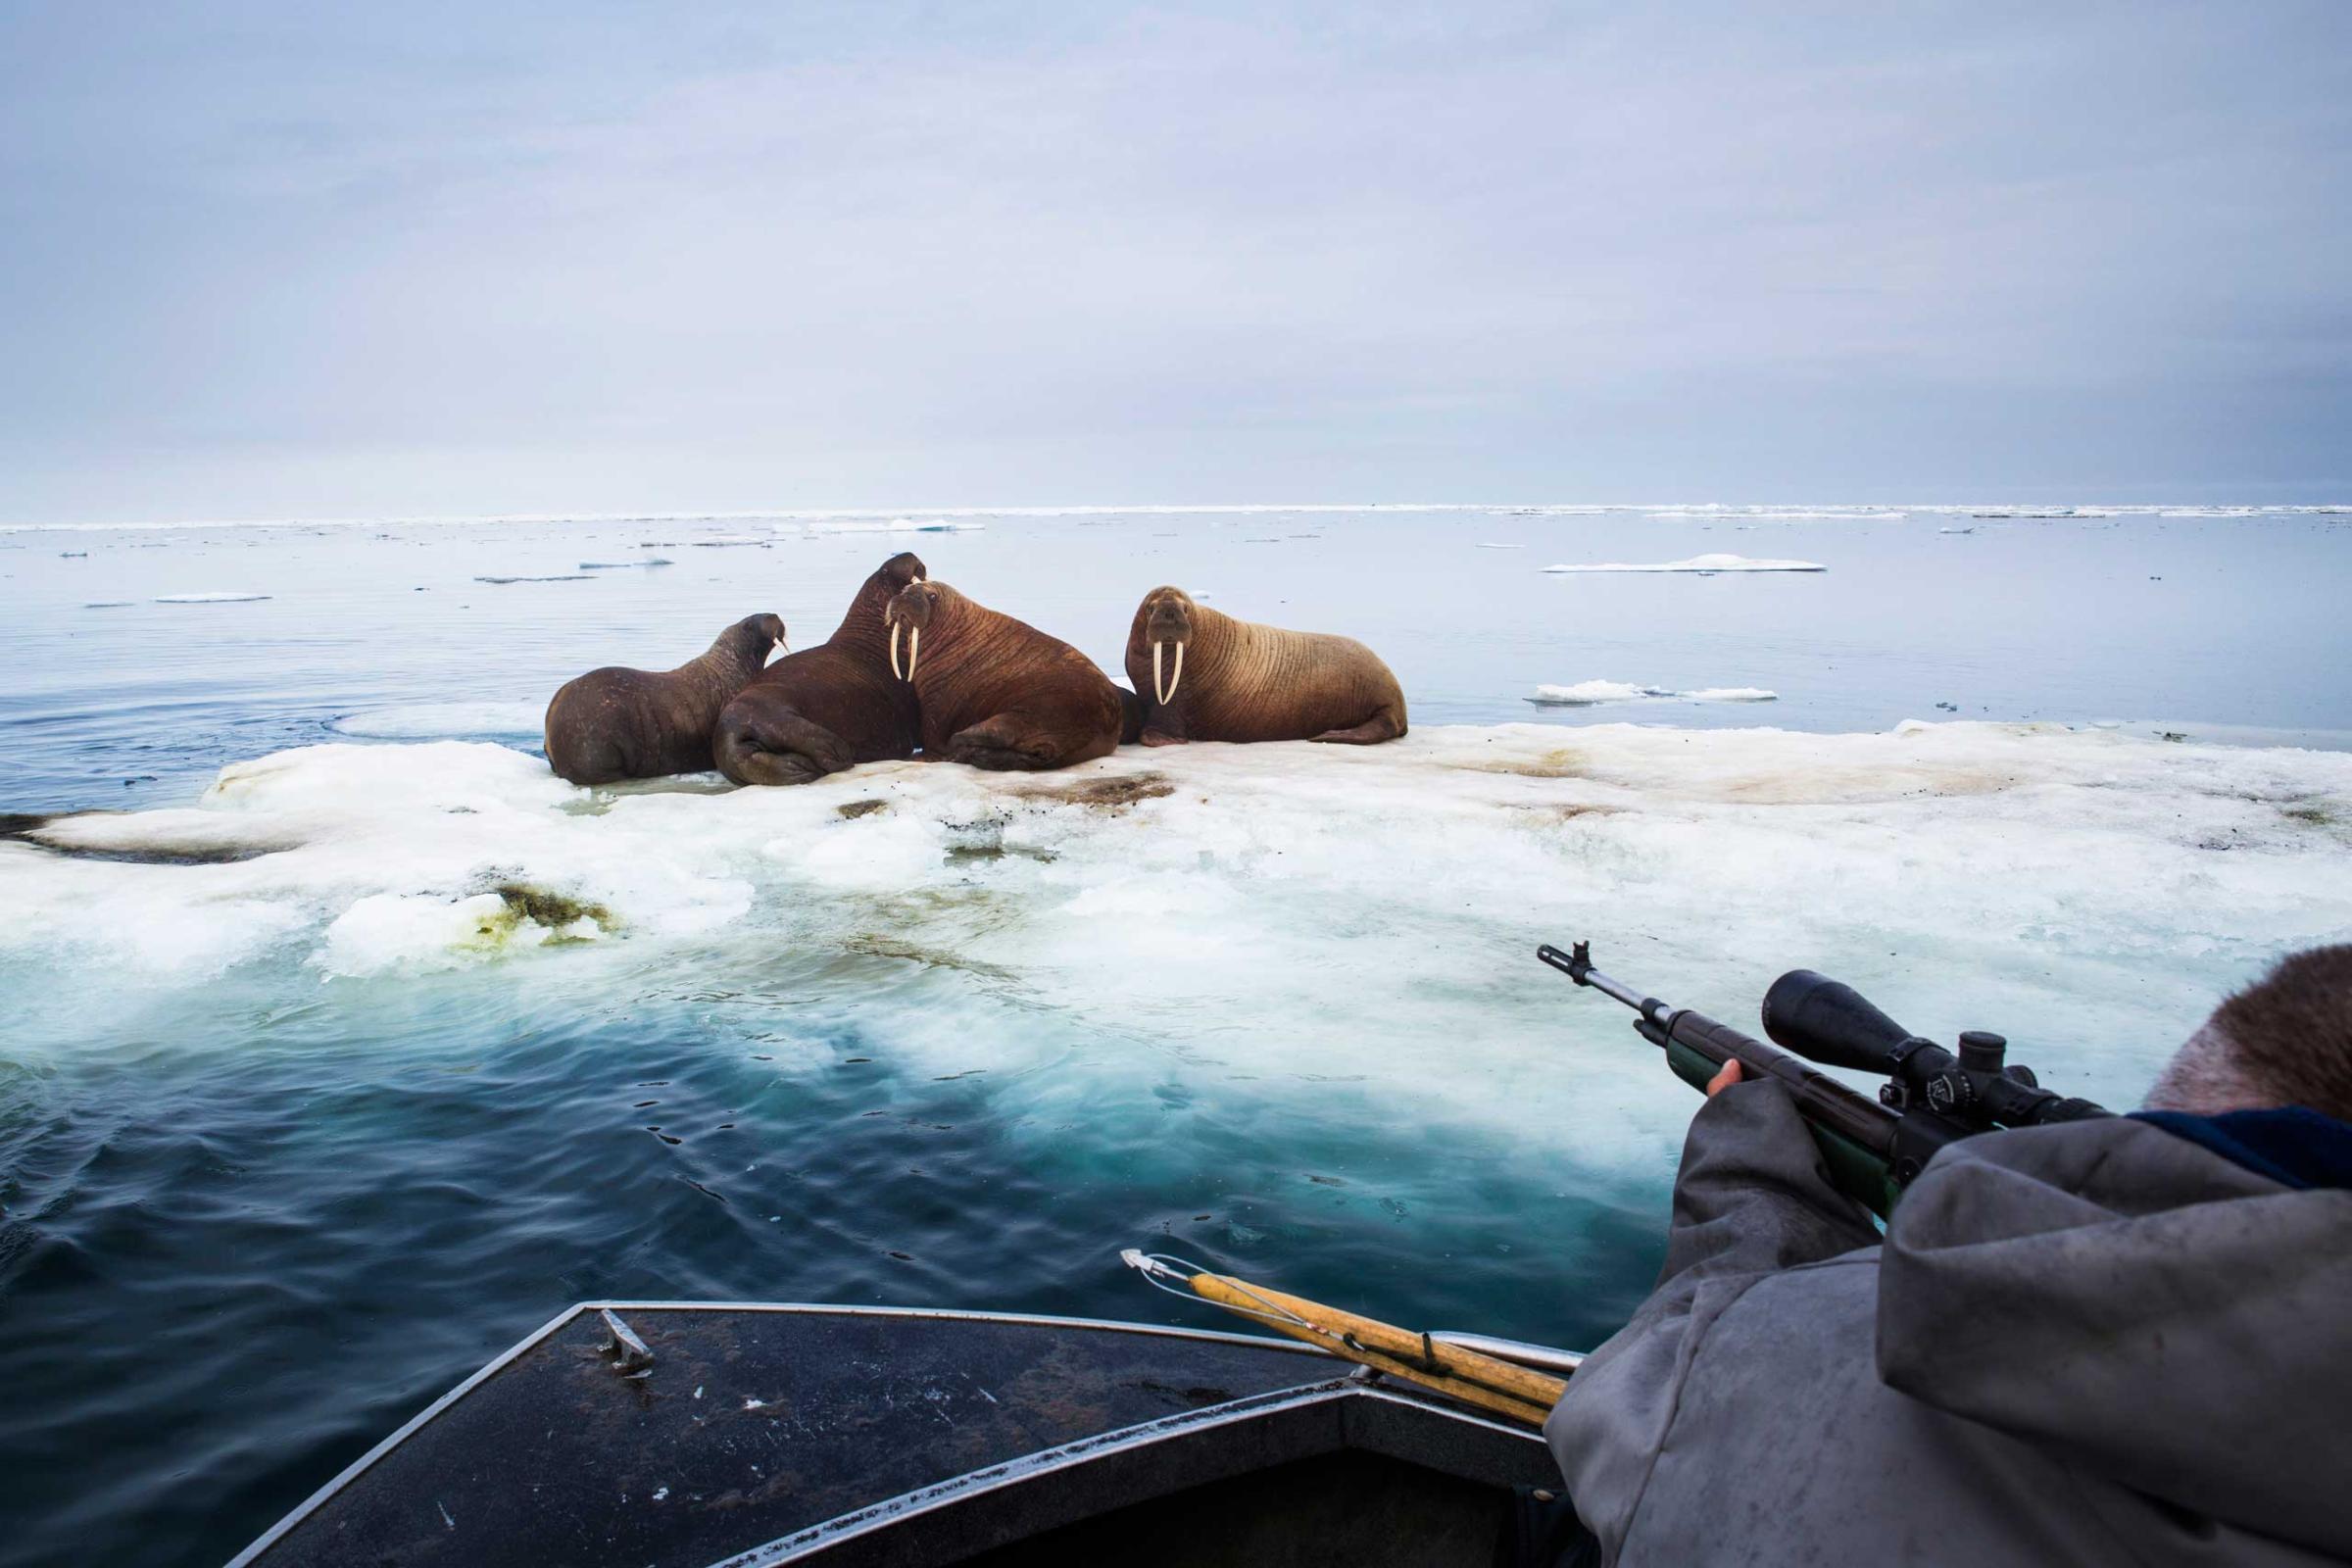 Input hunters harvest walrus in the Arctic Ocean near Barrow, Alaska. Hunters looked for ugruk (bearded seal) after the sea ice "went out" but came upon hundreds of walrus instead. Walrus this close to town during this time of year is rare and most likely due to warming weather.